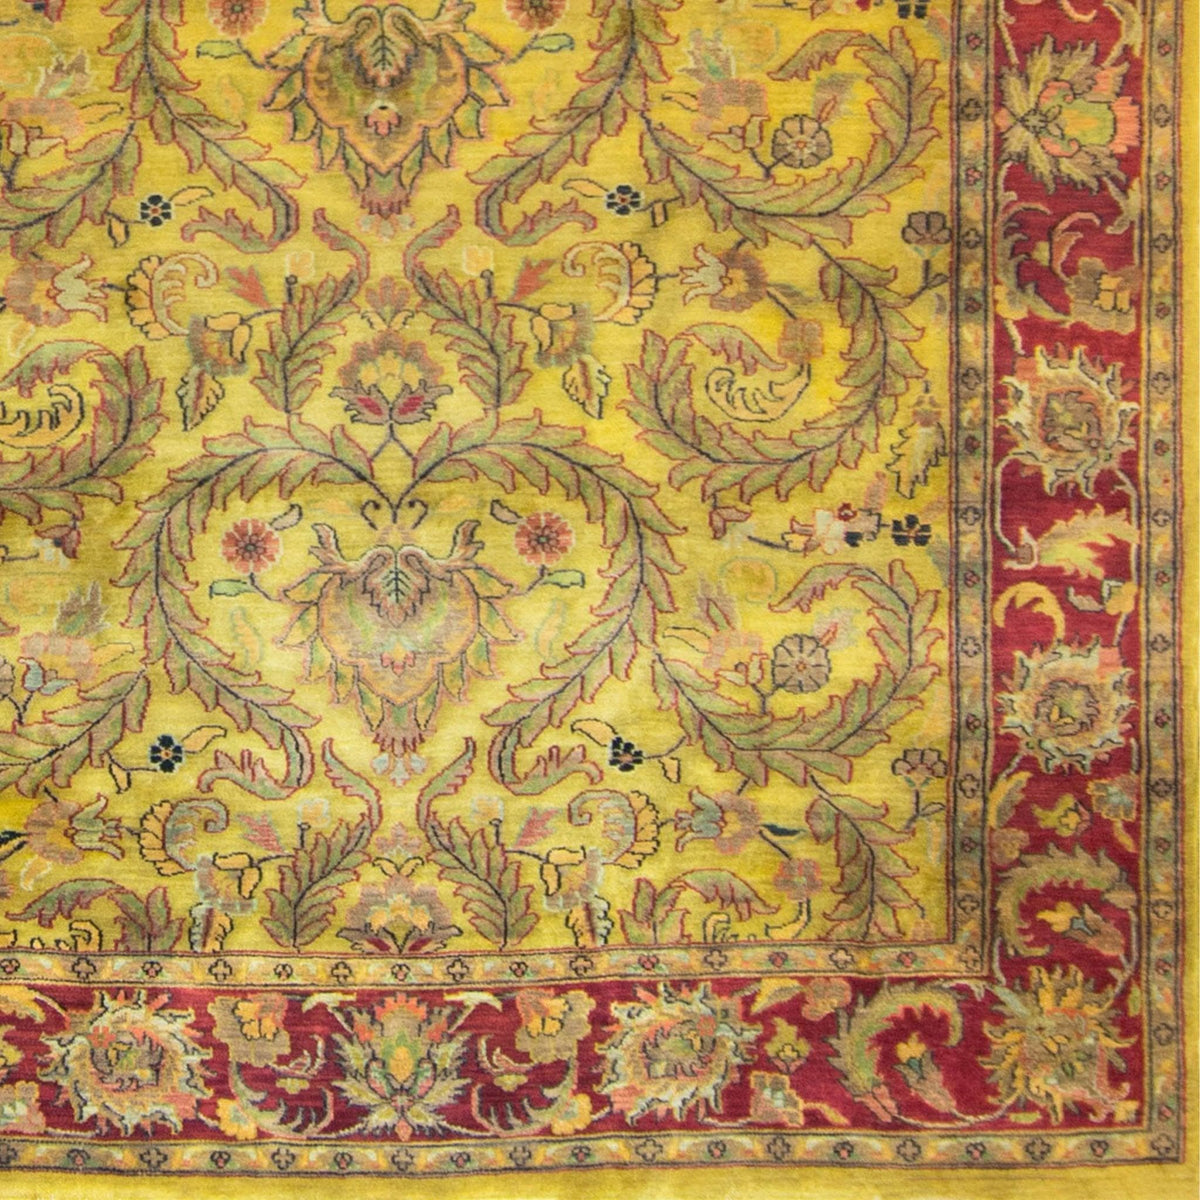 Fine Hand-knotted Wool Traditional Rug 270cm x 385cm